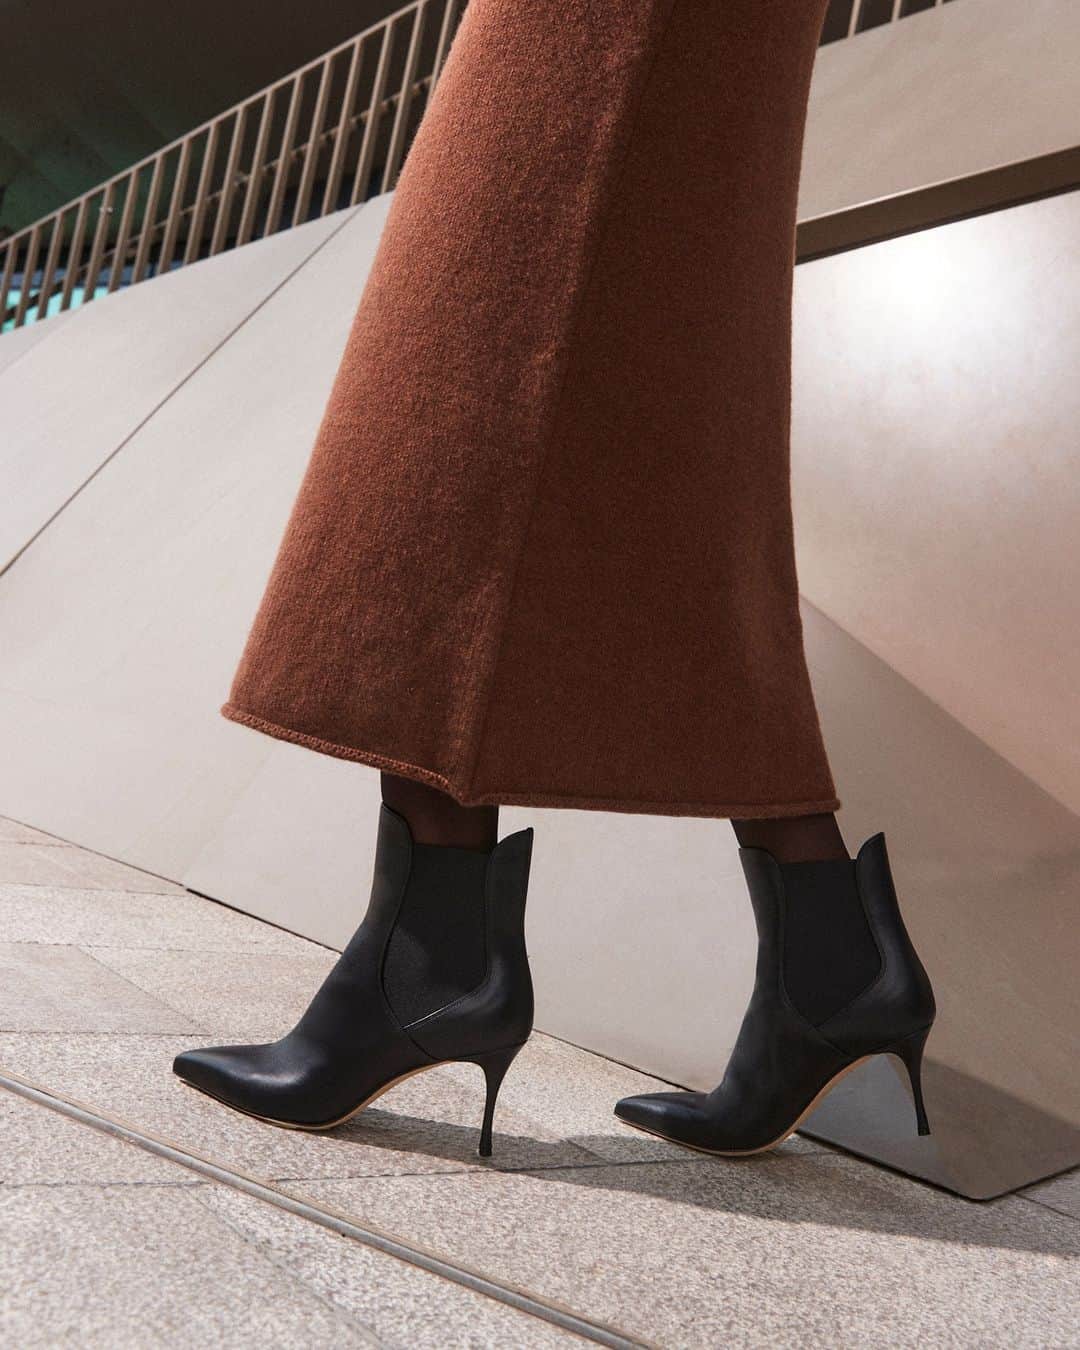 Sergio Rossiのインスタグラム：「The #Godiva ankle boot in black leather is the ideal shoe to seamlessly carry you from morning to evening. With its elastic side panel, it's the perfect choice to transition from your morning commute to evening get-togethers with friends. Get your pair on sergiorossi.com #SergioRossi」